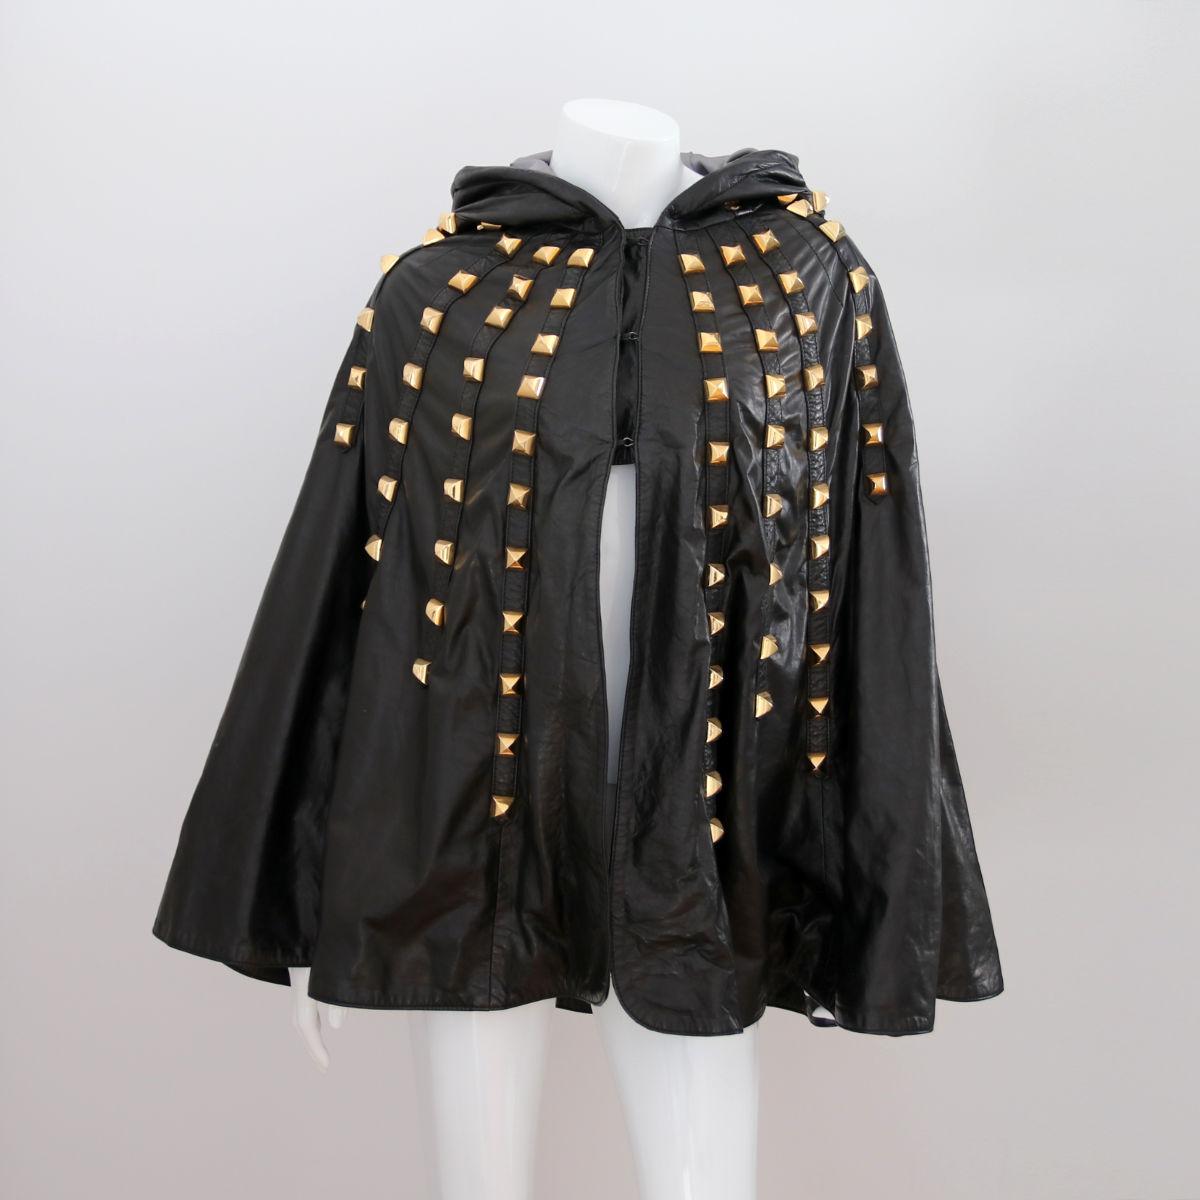 PHILIPP PLEIN 2010s Black Leather Cape / Poncho With Hood And Studs 1